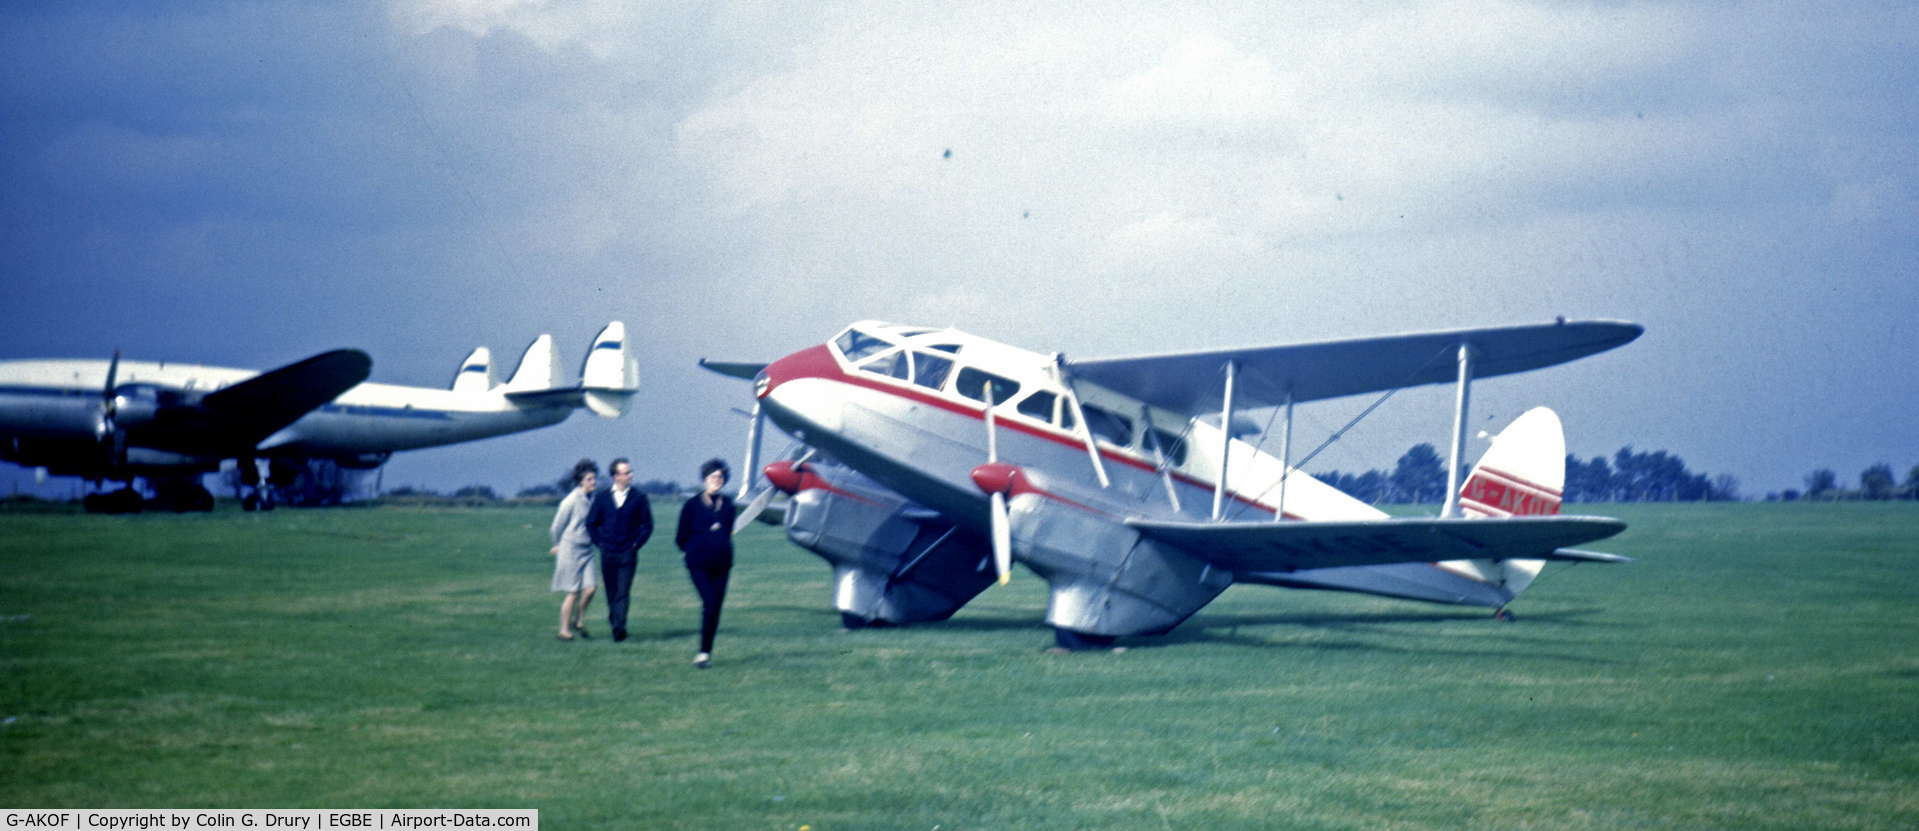 G-AKOF, 1941 De Havilland DH-89A Dominie/Dragon Rapide C/N 6538, G-AKOF, possibly at Coventry Airport